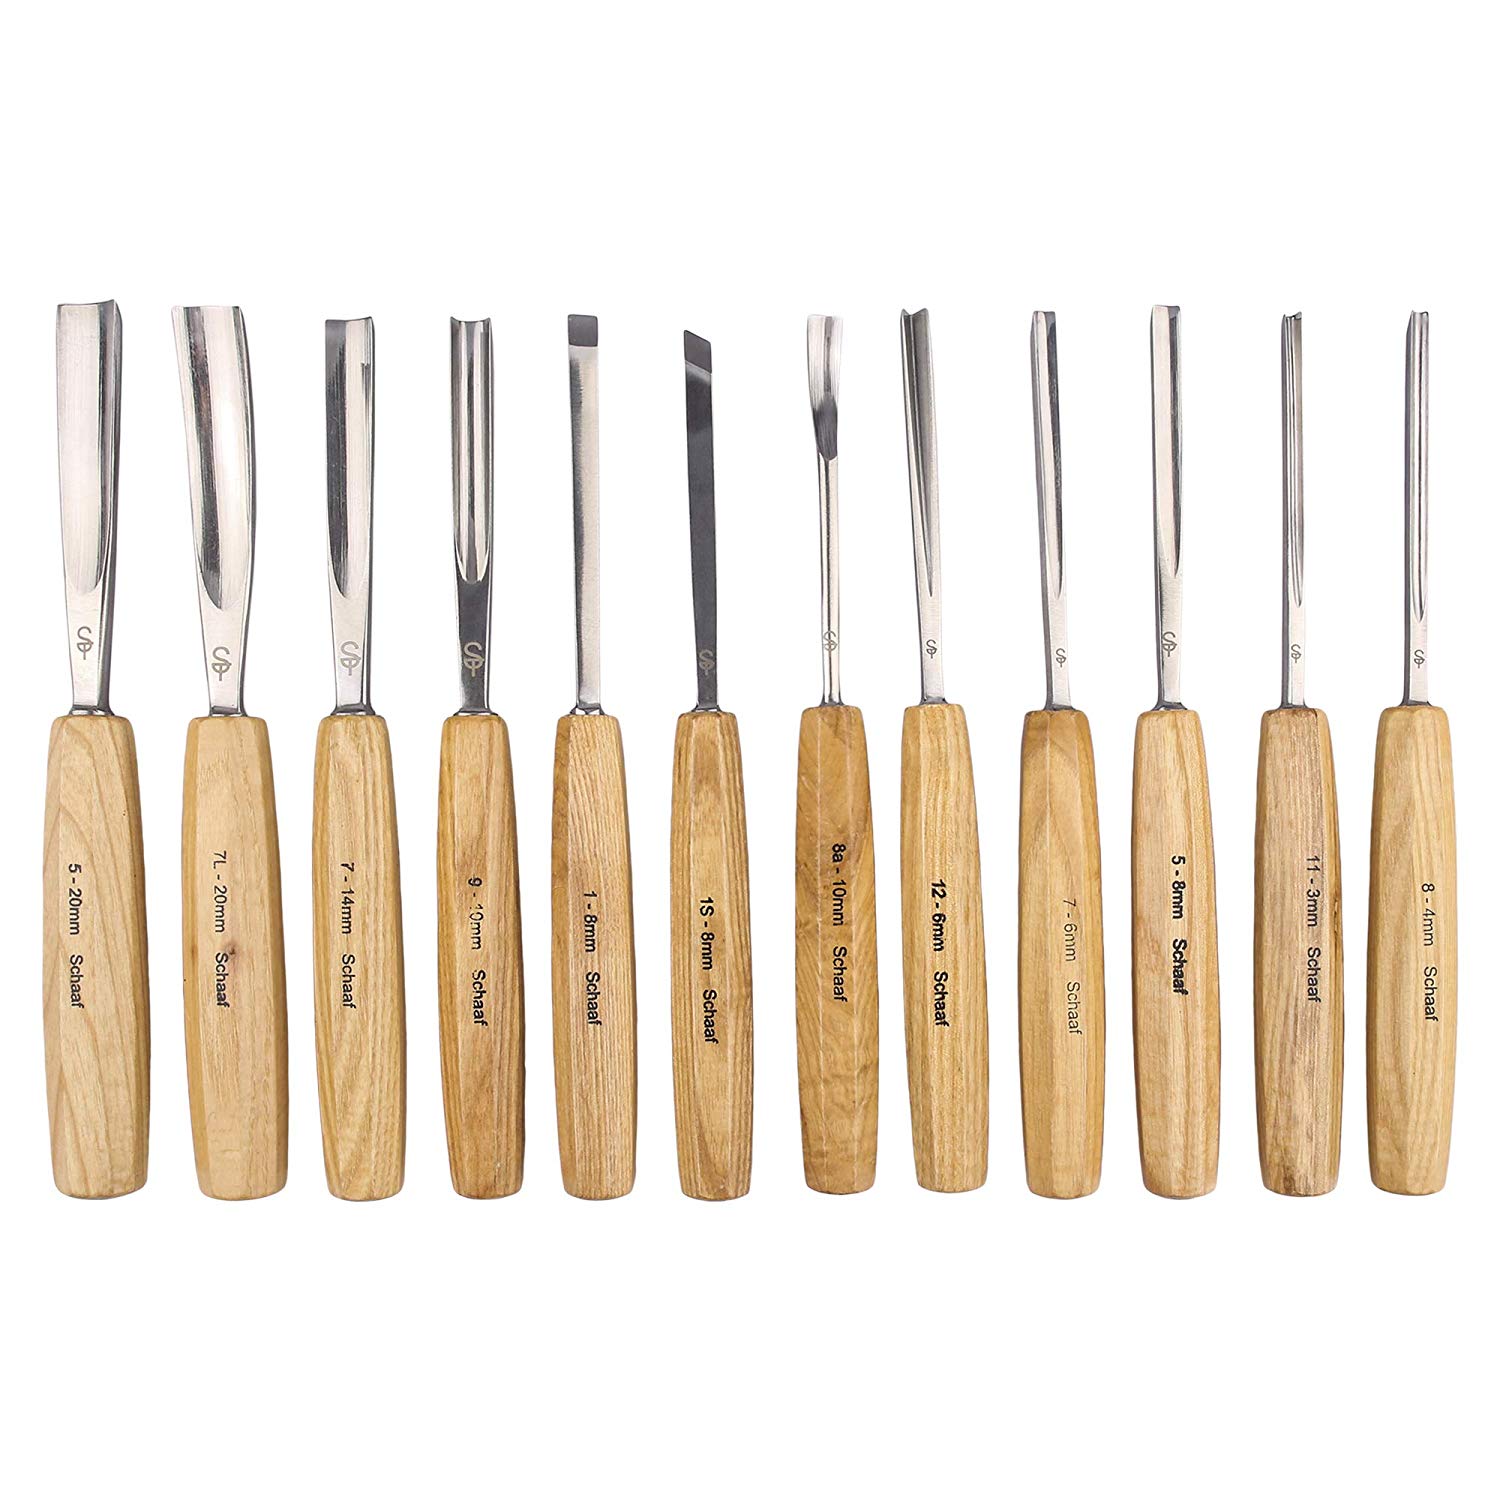 Schaaf Wood Carving Tools Set of 7 | Chisel set with Canvas Case | Gouges  and Carving Chisels Set for Beginners and Professionals | Razor Sharp CR-V